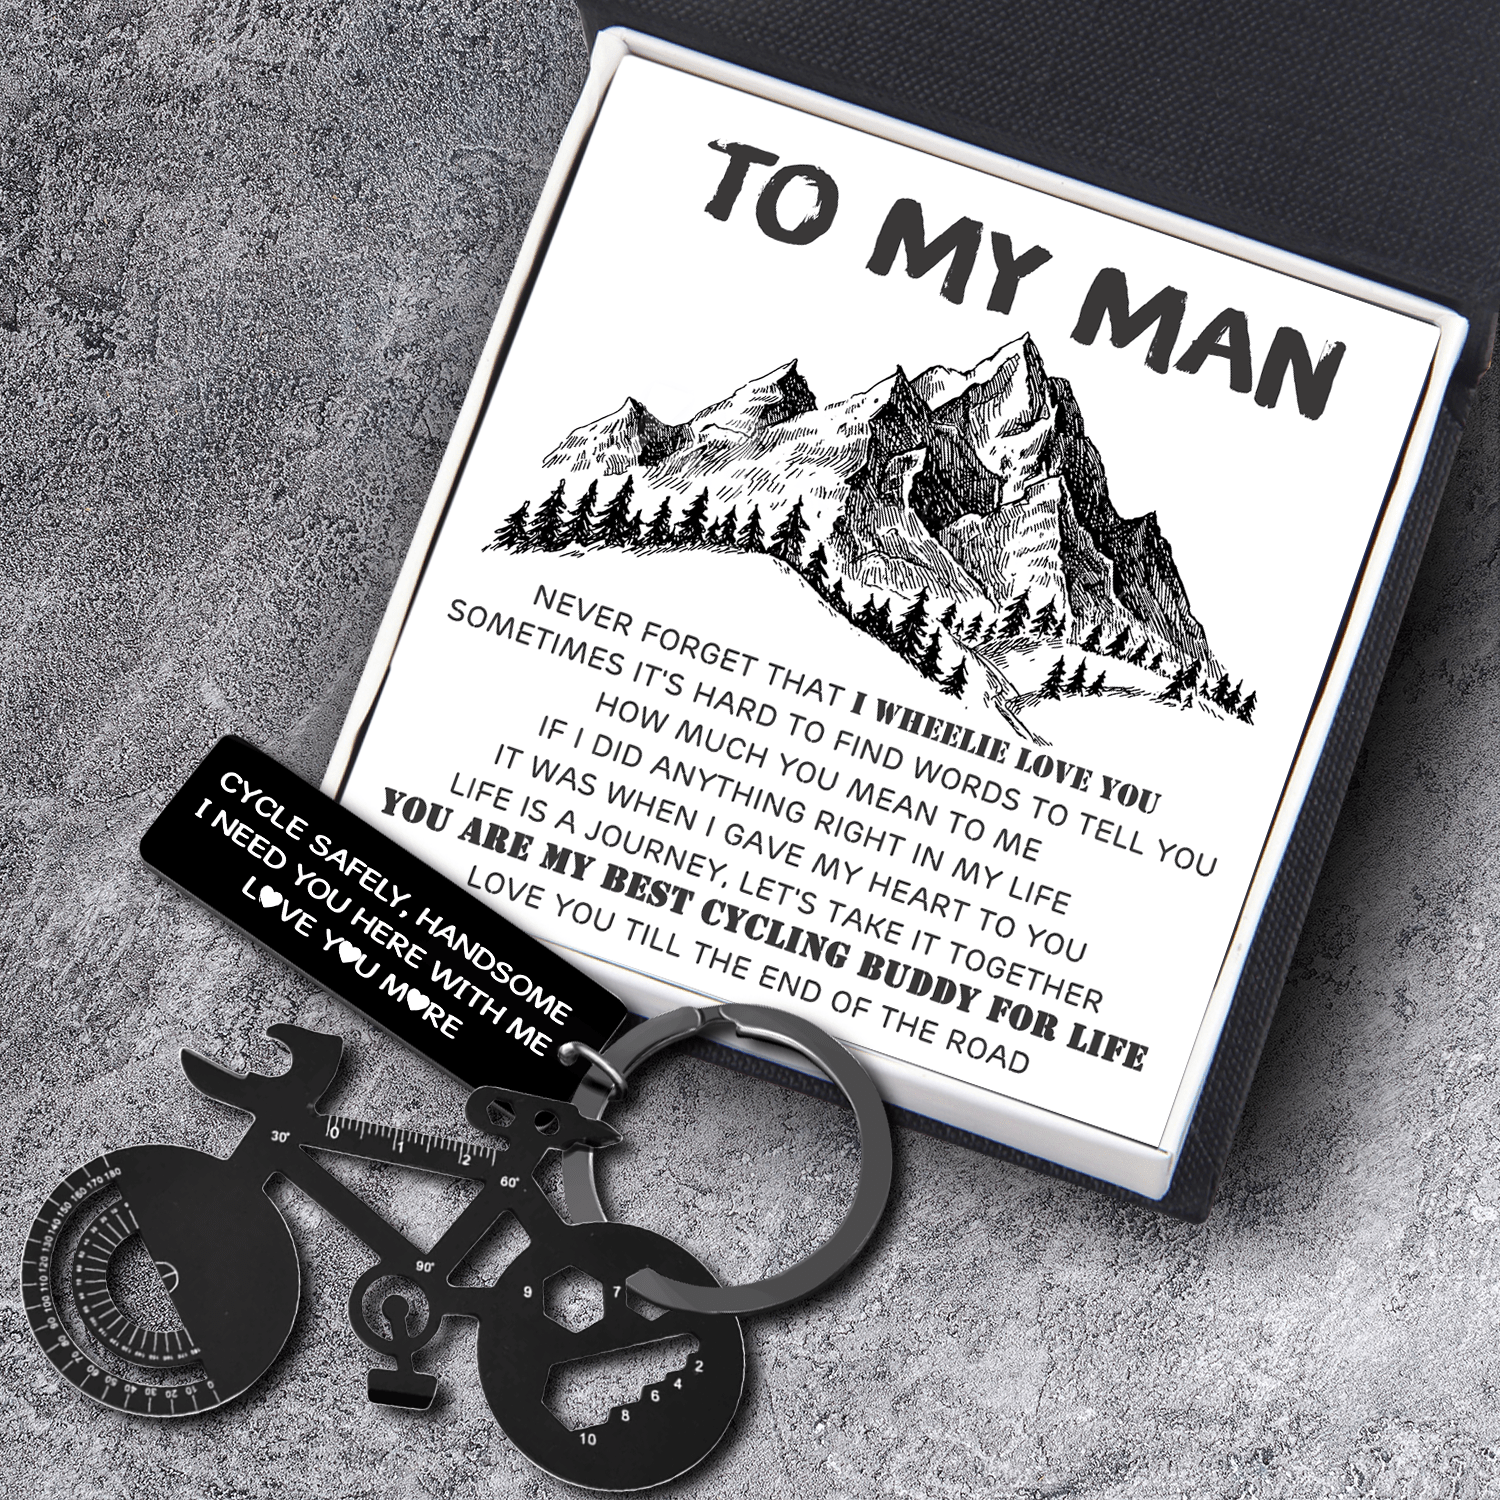 Jet Black Cycling Multi-tool Keychain - Cycling - To My Man - Life Is A Journey - Gkzo26002